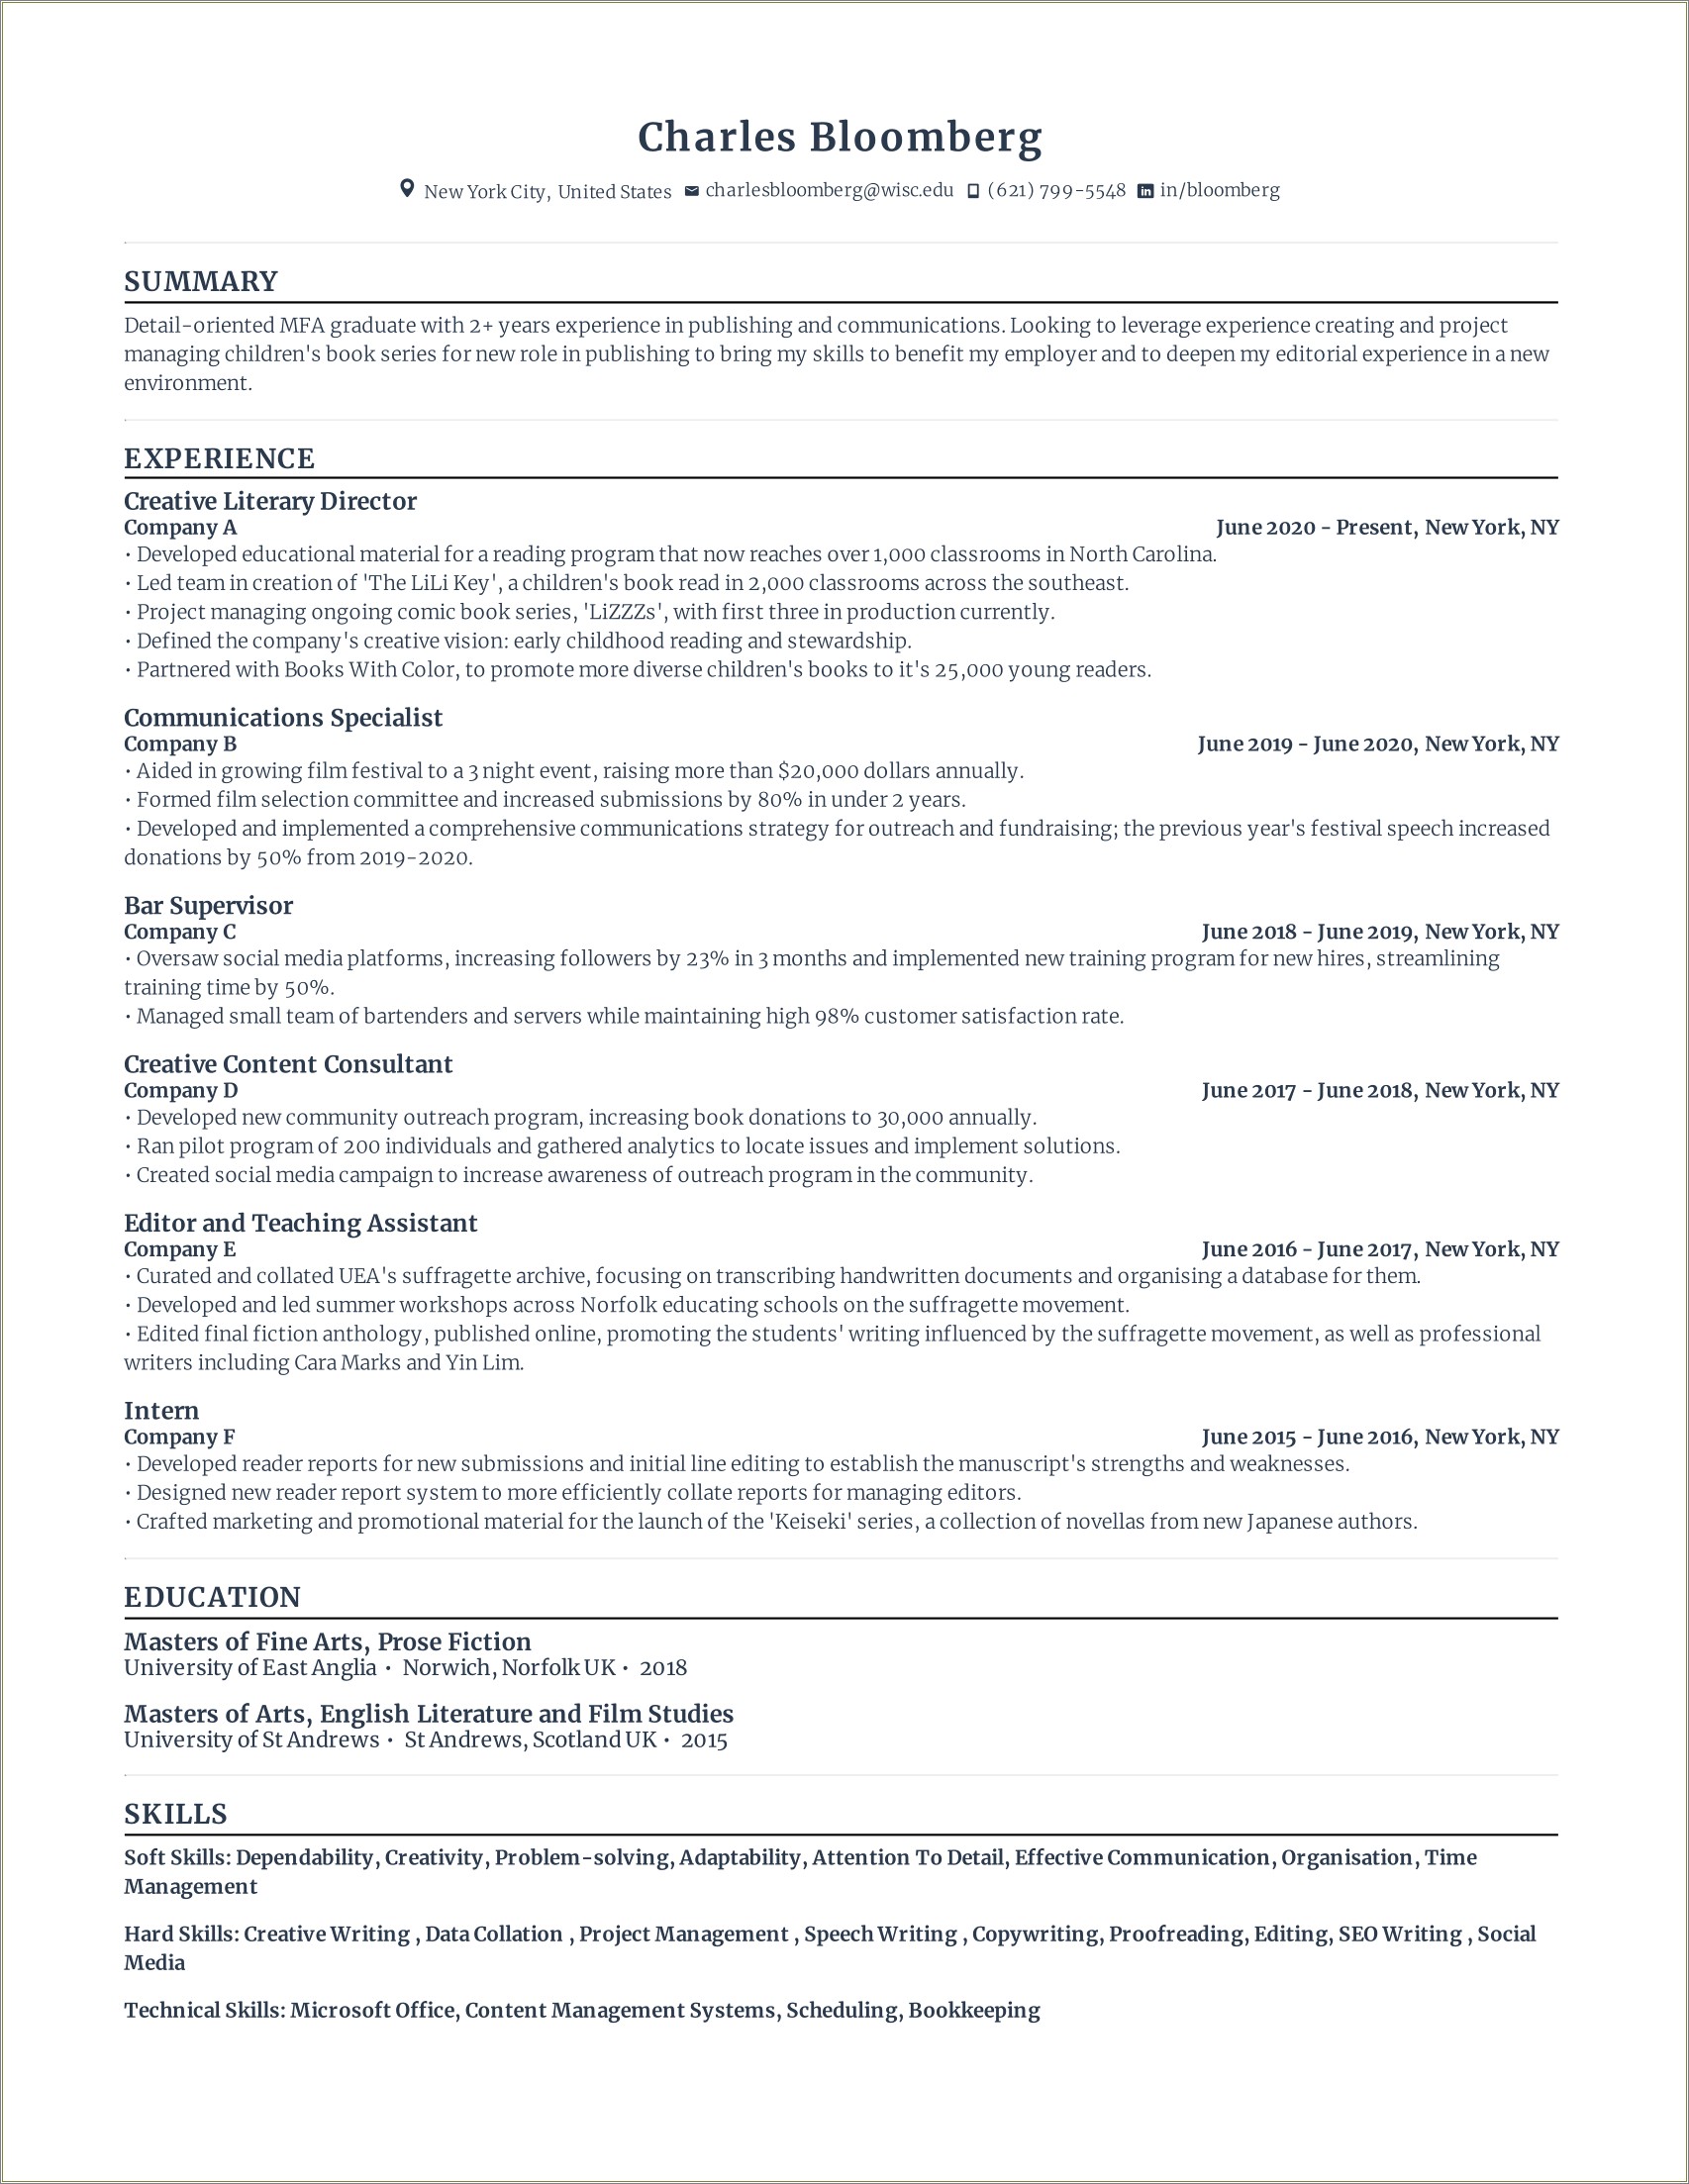 Less Than 1 Year Experience Resume